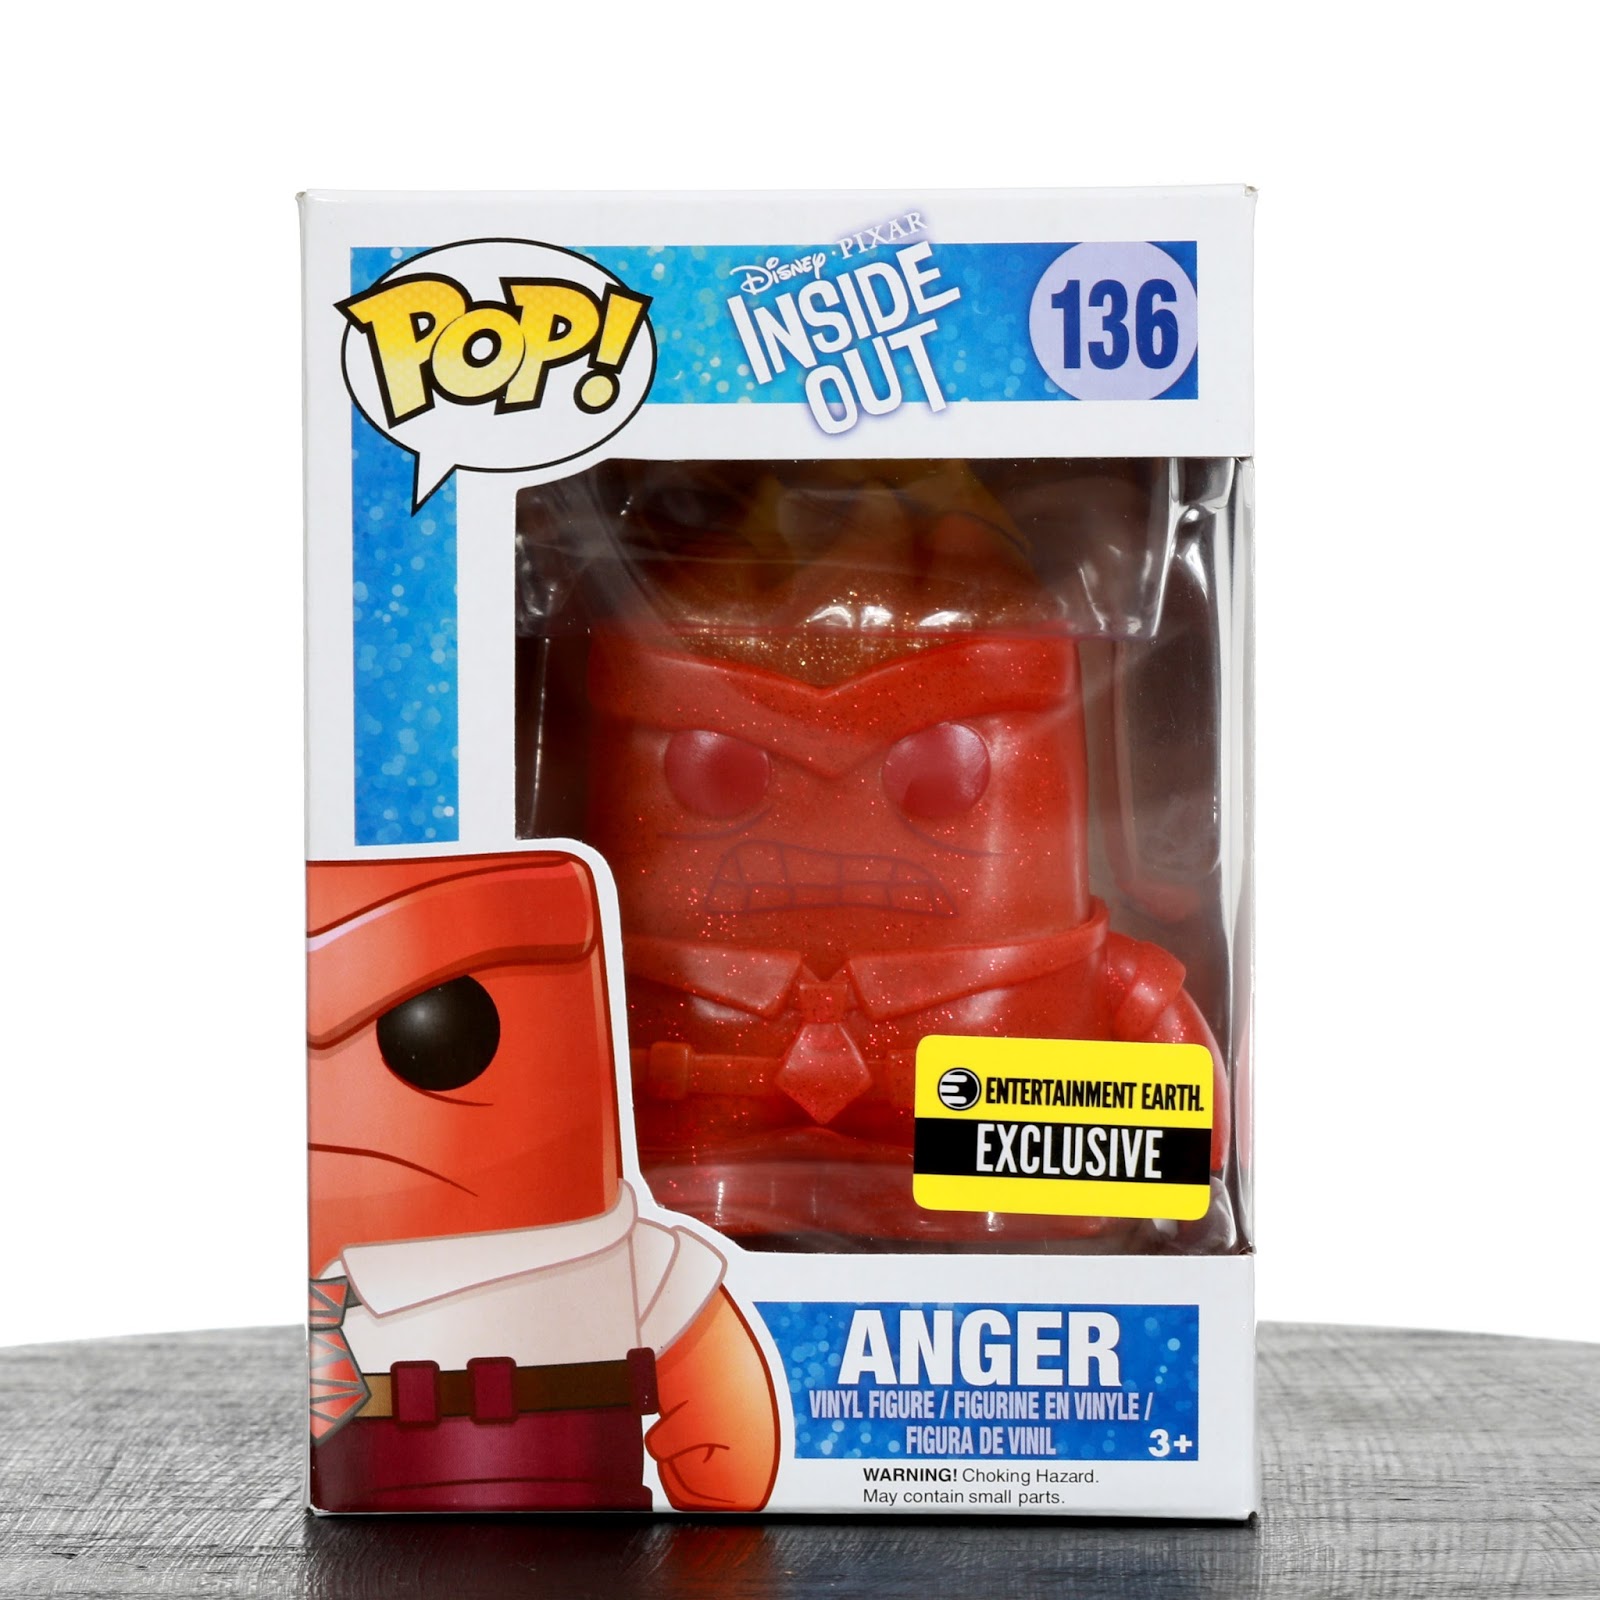 Inside Out Crystal Anger Funko "POP!" Entertainment Earth Exclusive